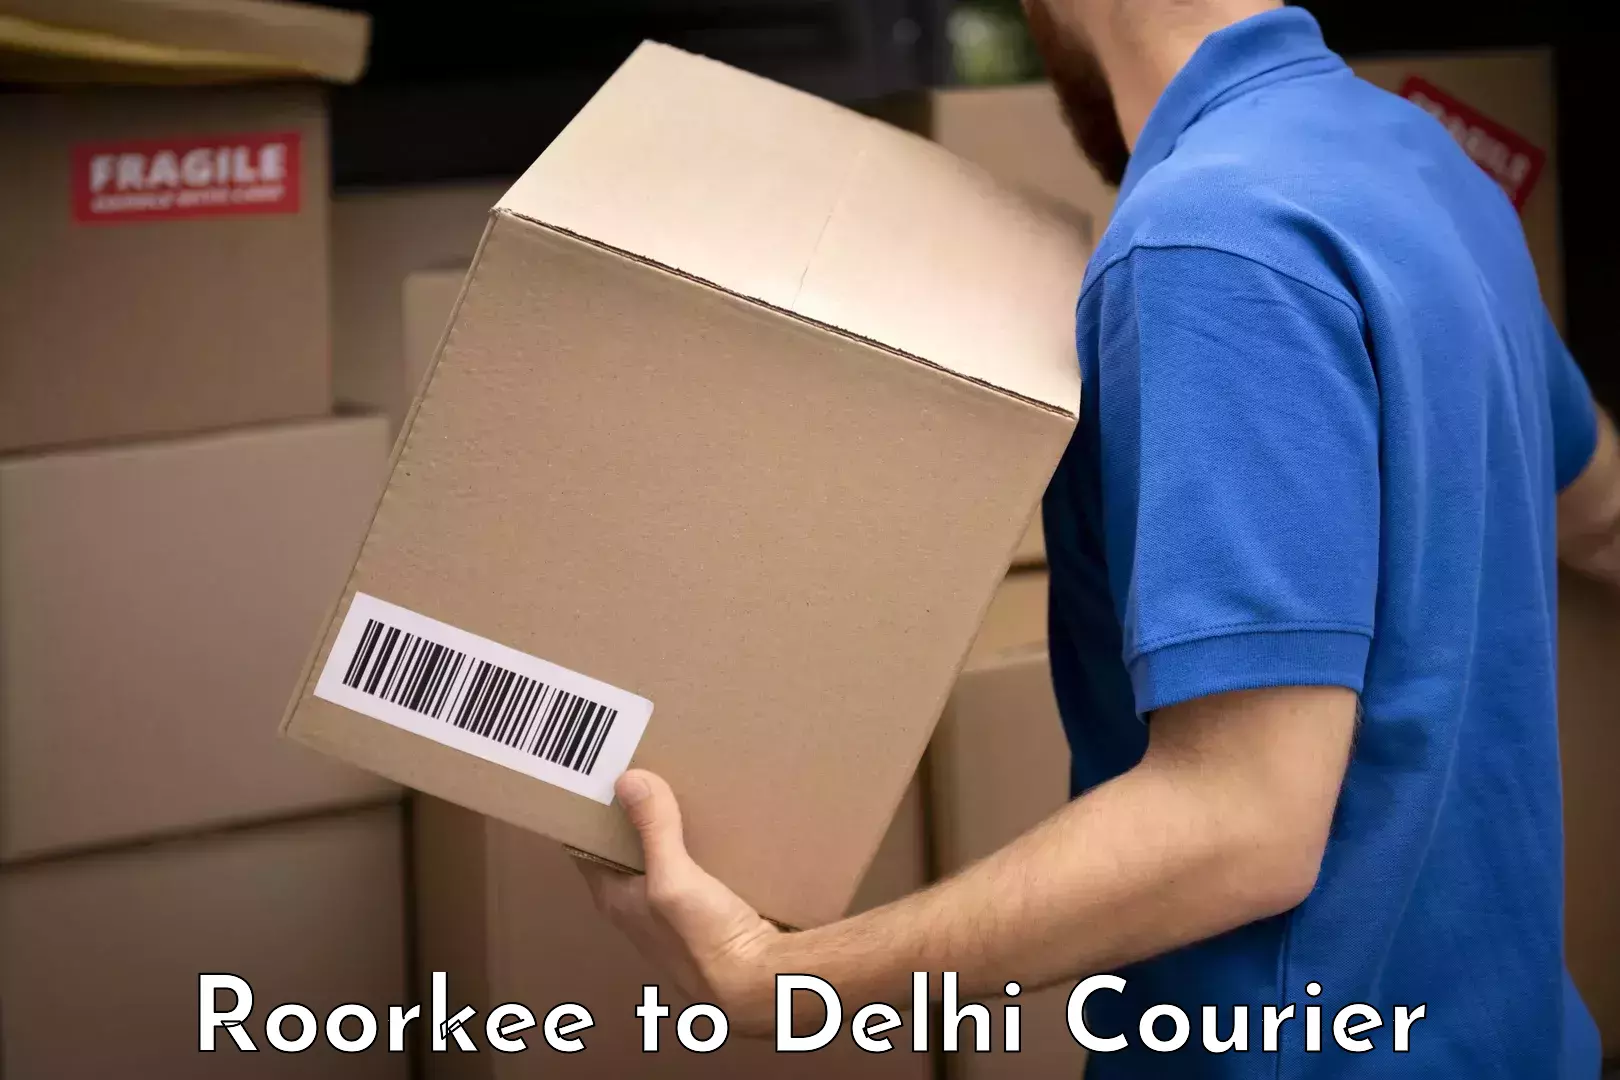 Luggage delivery app Roorkee to Delhi